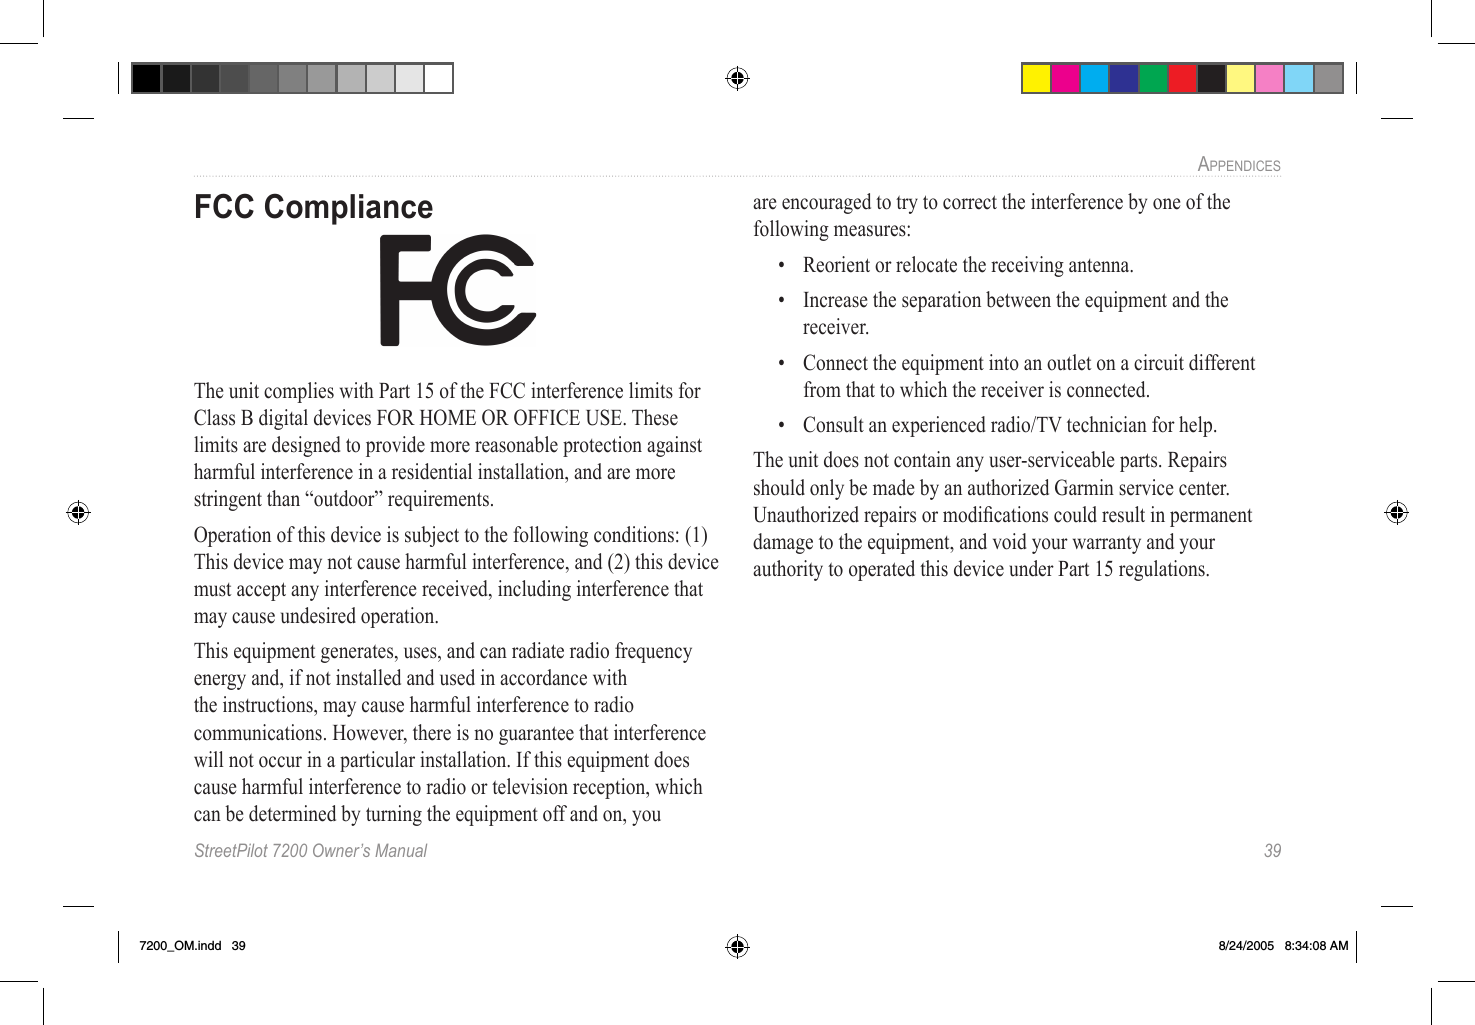 StreetPilot 7200 Owner’s Manual  39APPENDICESFCC ComplianceThe unit complies with Part 15 of the FCC interference limits for Class B digital devices FOR HOME OR OFFICE USE. These limits are designed to provide more reasonable protection against harmful interference in a residential installation, and are more stringent than “outdoor” requirements.Operation of this device is subject to the following conditions: (1) This device may not cause harmful interference, and (2) this device must accept any interference received, including interference that may cause undesired operation.This equipment generates, uses, and can radiate radio frequency energy and, if not installed and used in accordance with the instructions, may cause harmful interference to radio communications. However, there is no guarantee that interference will not occur in a particular installation. If this equipment does cause harmful interference to radio or television reception, which can be determined by turning the equipment off and on, you are encouraged to try to correct the interference by one of the following measures:•  Reorient or relocate the receiving antenna.•  Increase the separation between the equipment and the receiver.•  Connect the equipment into an outlet on a circuit different from that to which the receiver is connected.•  Consult an experienced radio/TV technician for help.The unit does not contain any user-serviceable parts. Repairs should only be made by an authorized Garmin service center. Unauthorized repairs or modiﬁcations could result in permanent damage to the equipment, and void your warranty and your authority to operated this device under Part 15 regulations.7200_OM.indd   39 8/24/2005   8:34:08 AM